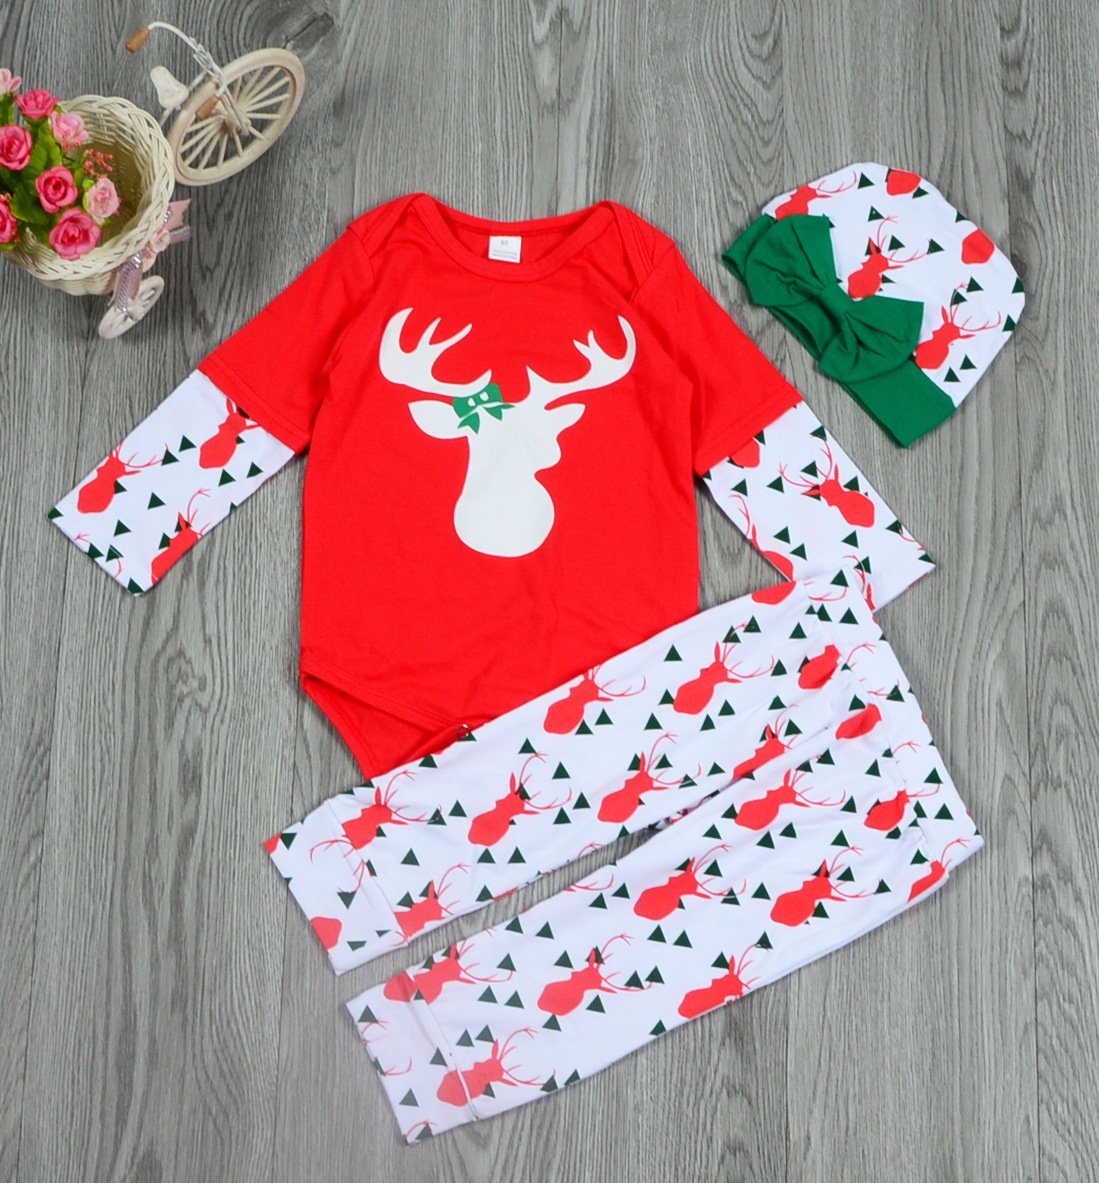 Baby Kids Girl Christmas Romper Jumpsuit Outfits Costume